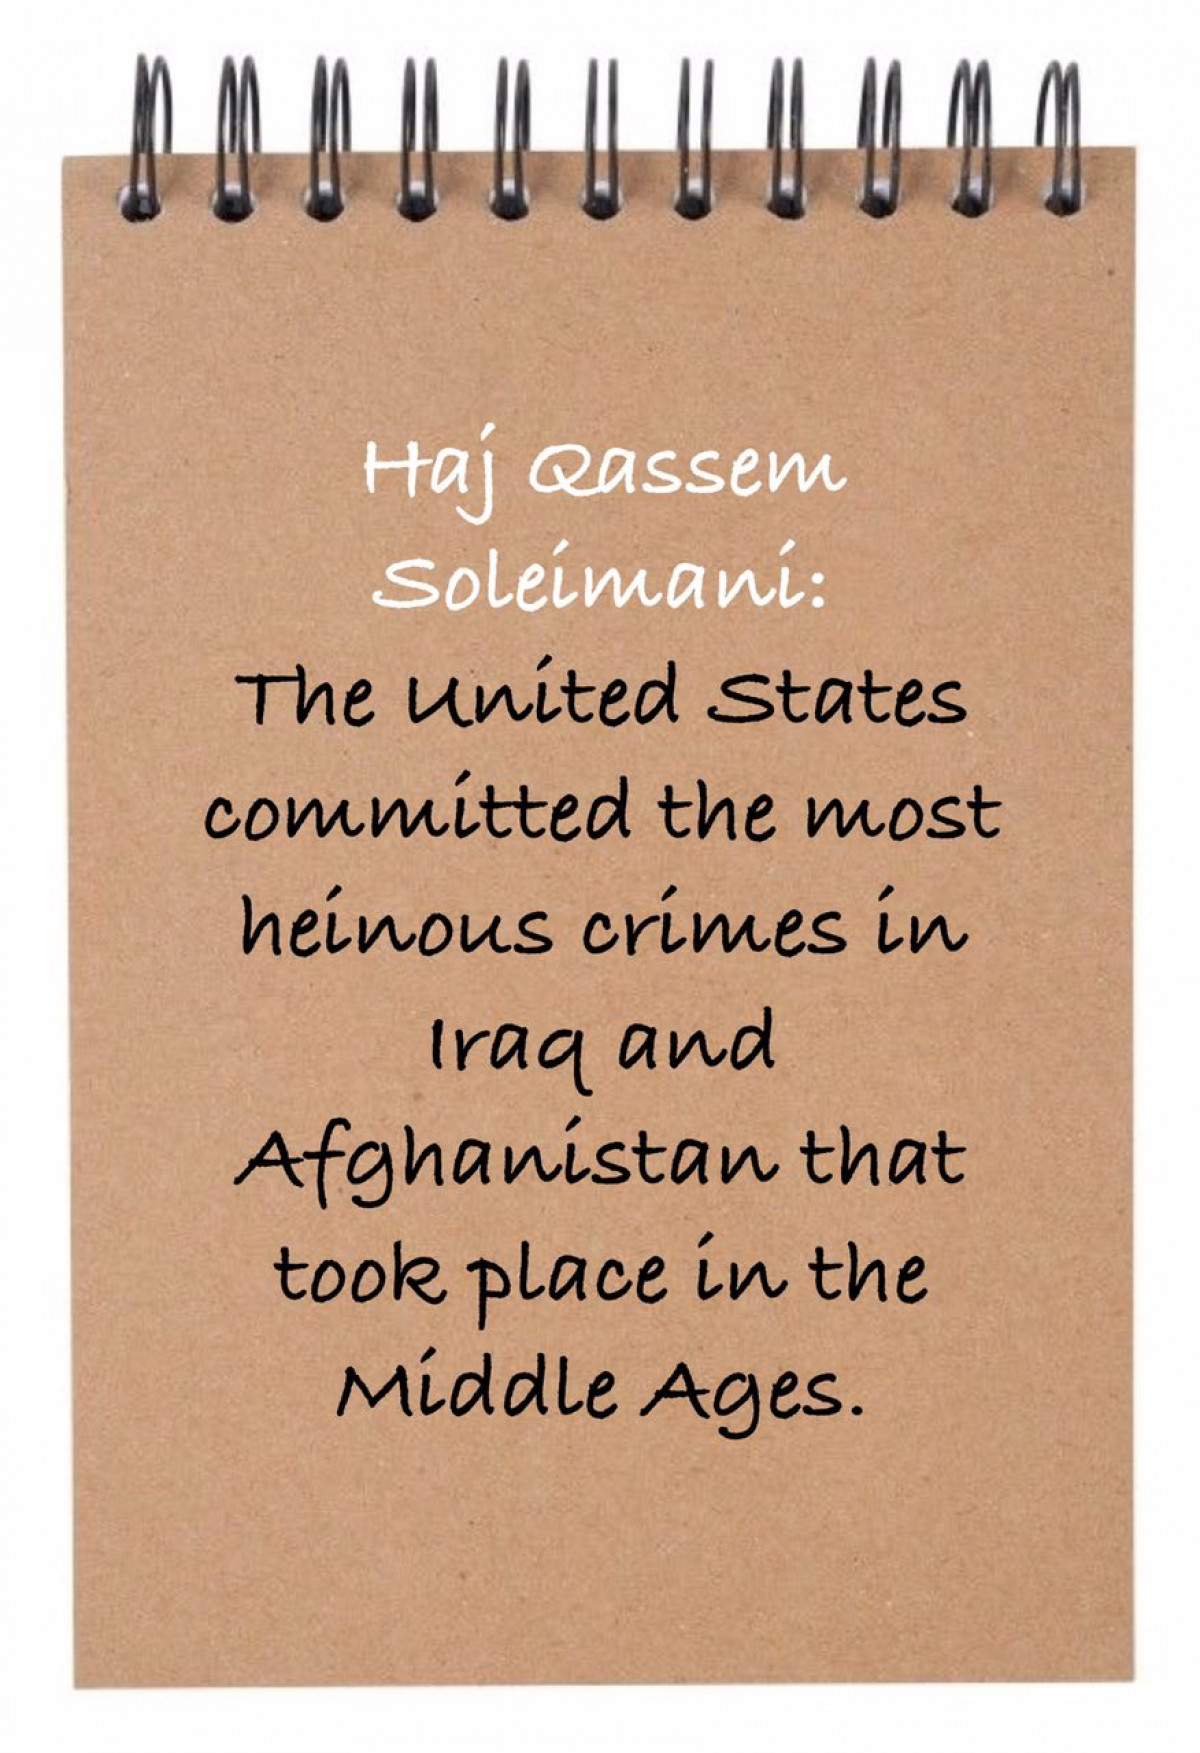 The United States committed the most heinous crimes in Iraq and Afghanistan that took place in the Middle Ages